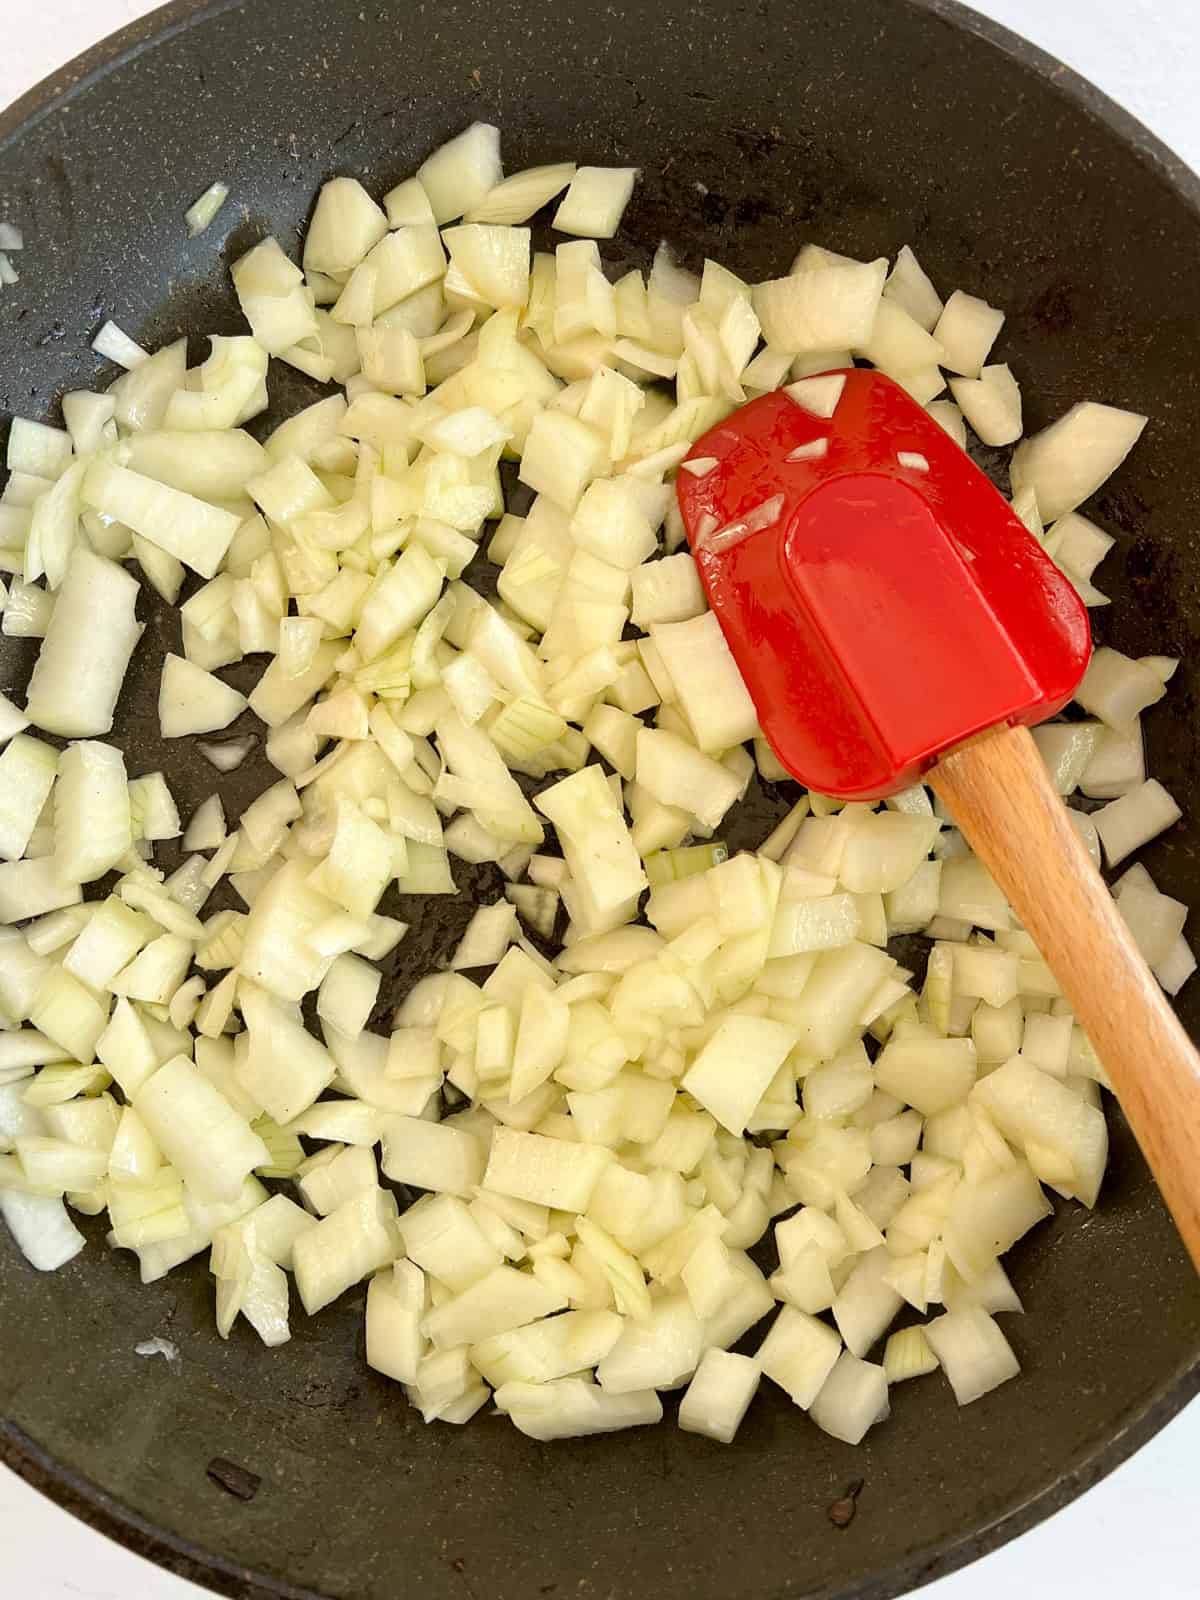 sweating onions in a fry pan